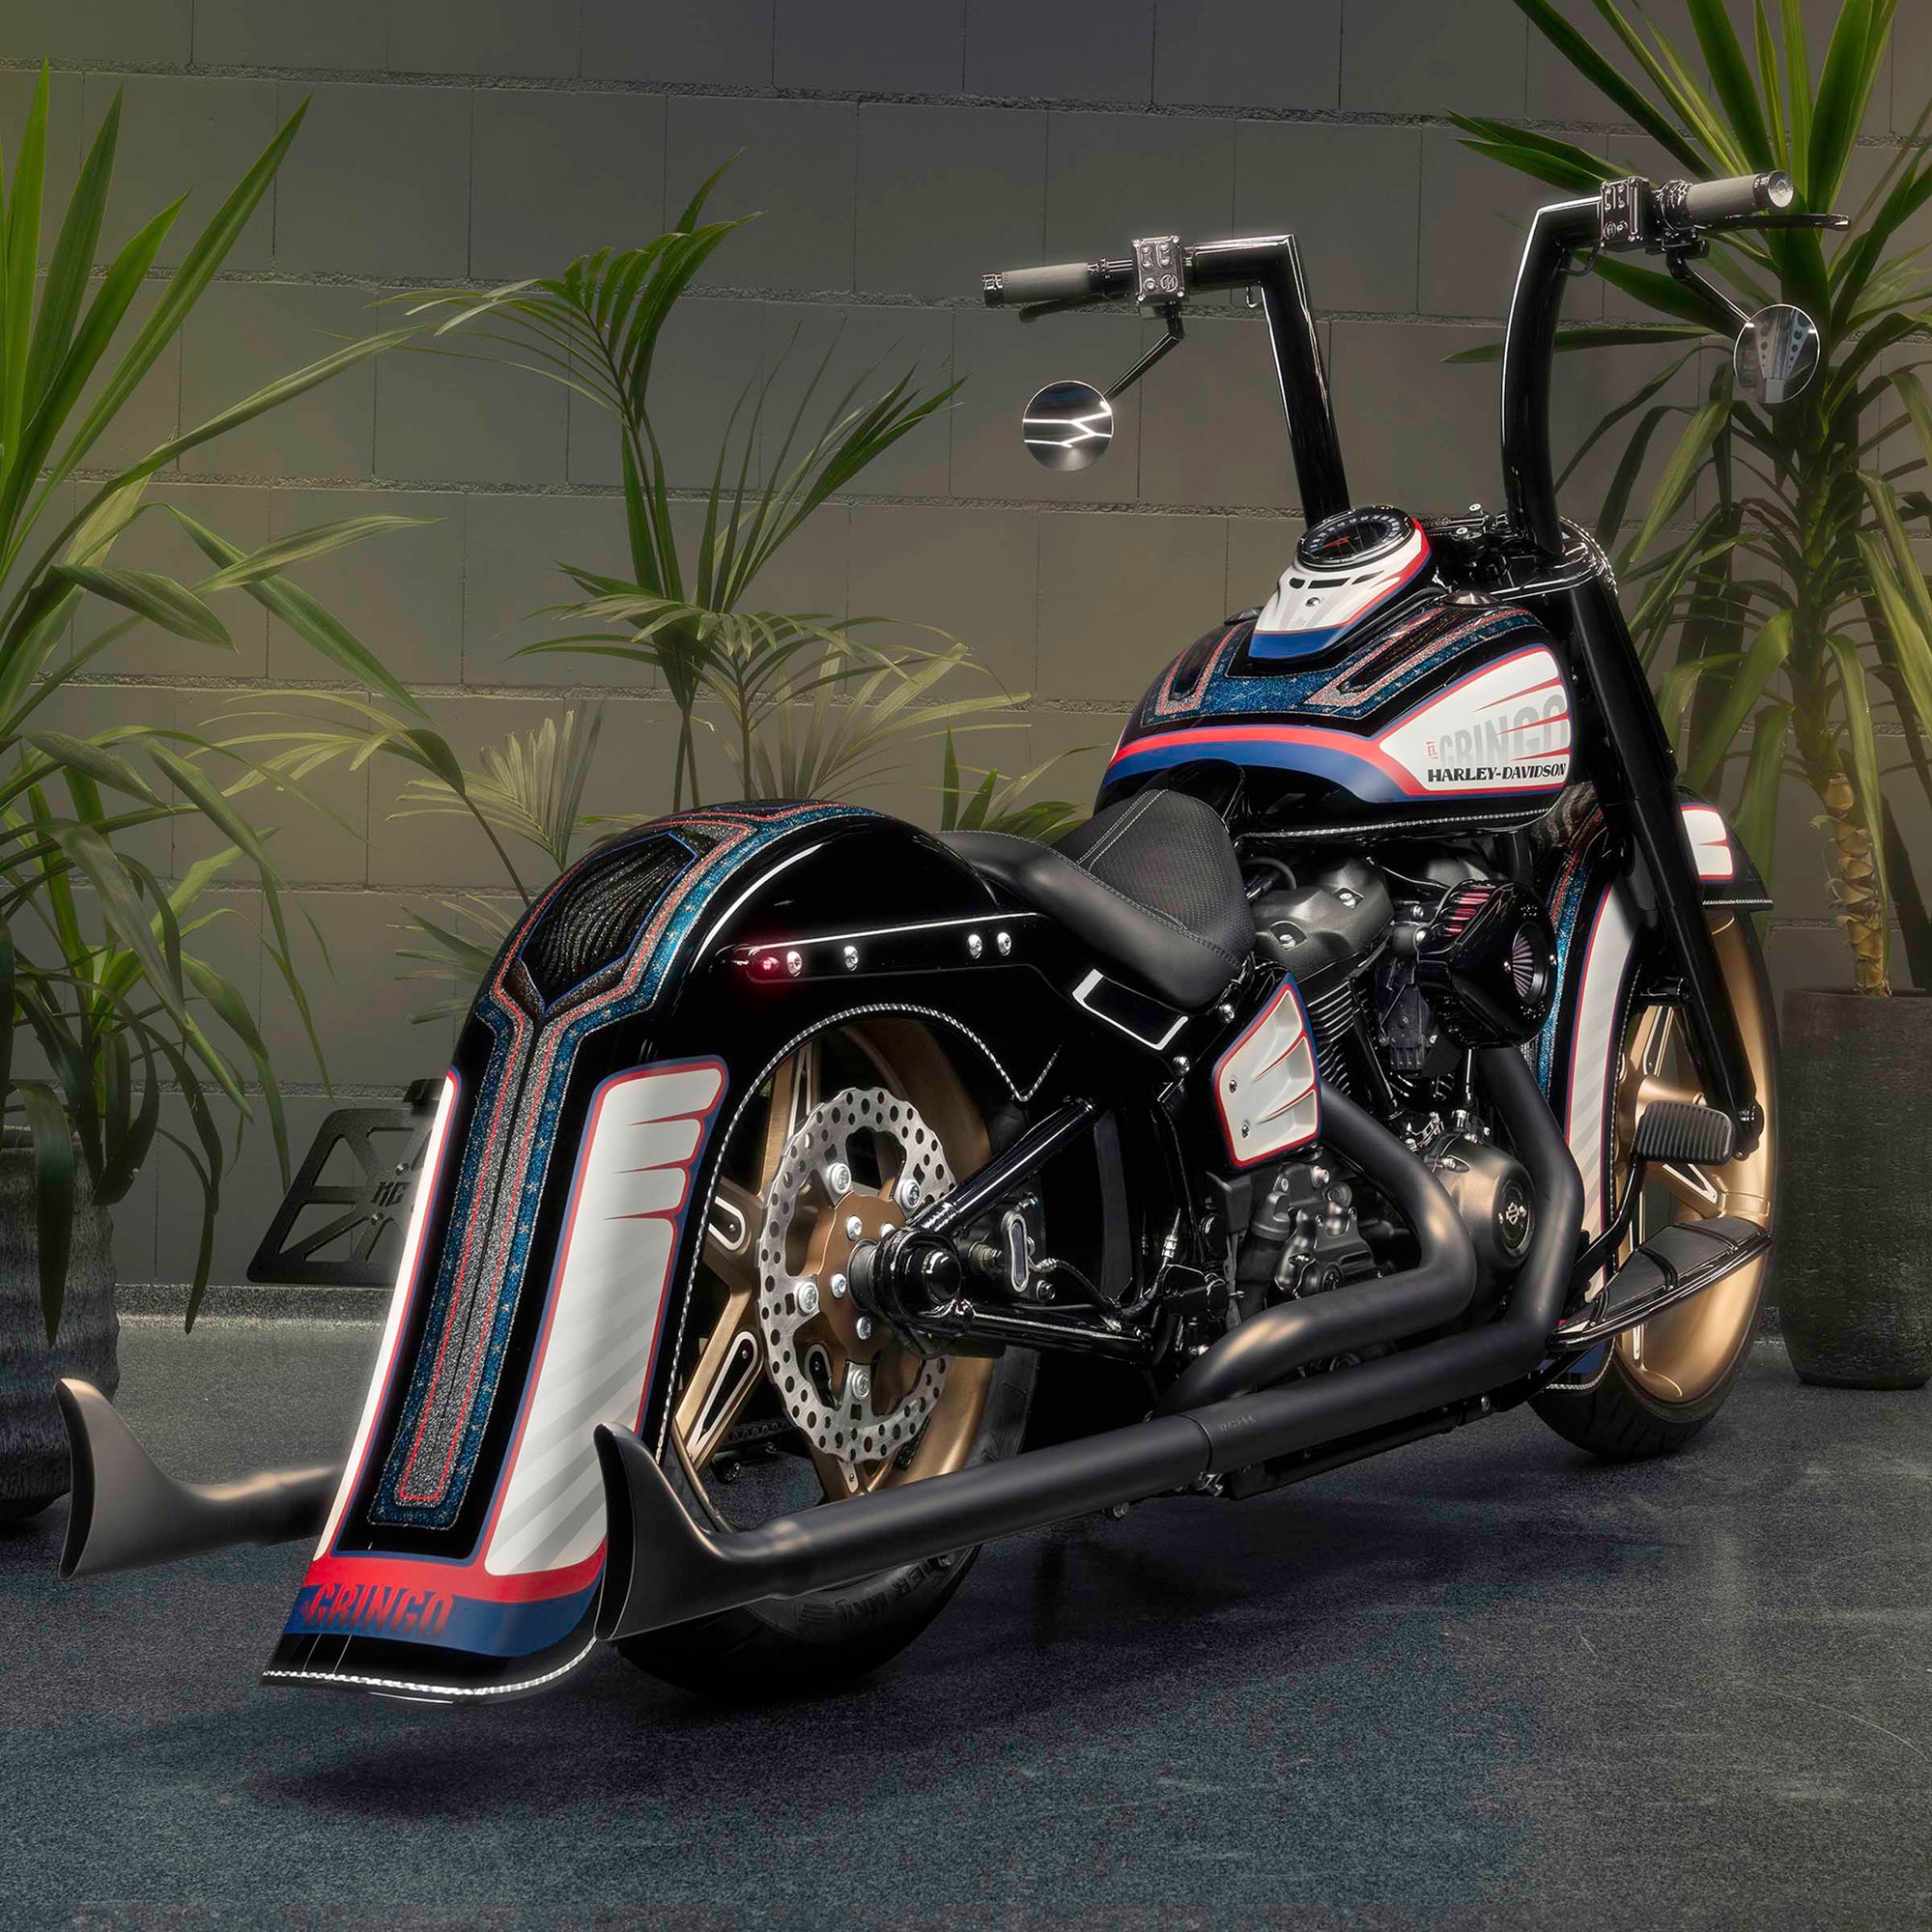 Modified Harley Davidson Heritage motorcycle with Killer Custom parts from the rear with some house plants in the background